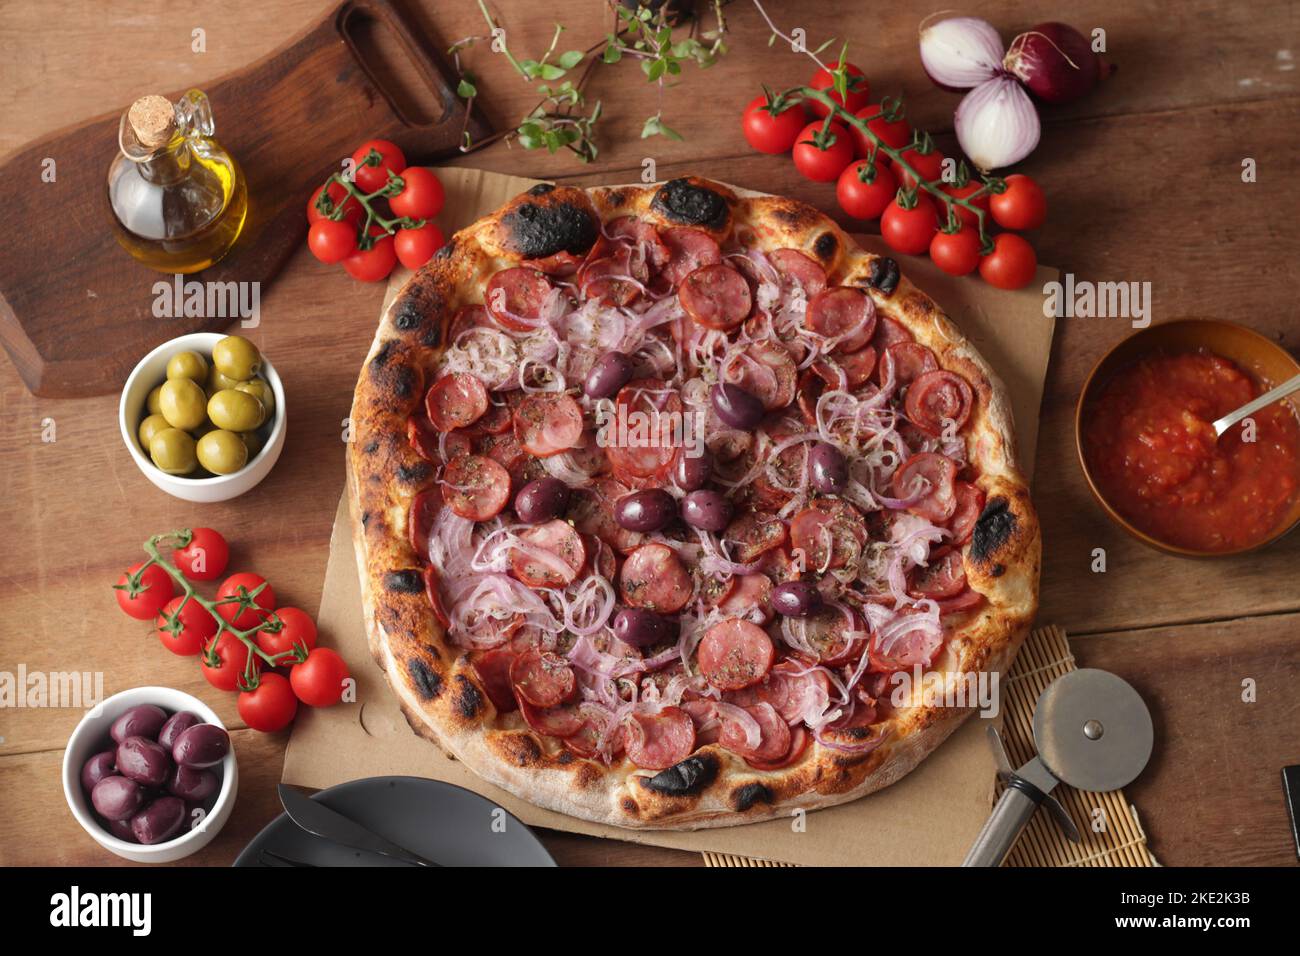 Traditional pizza Stock Photo